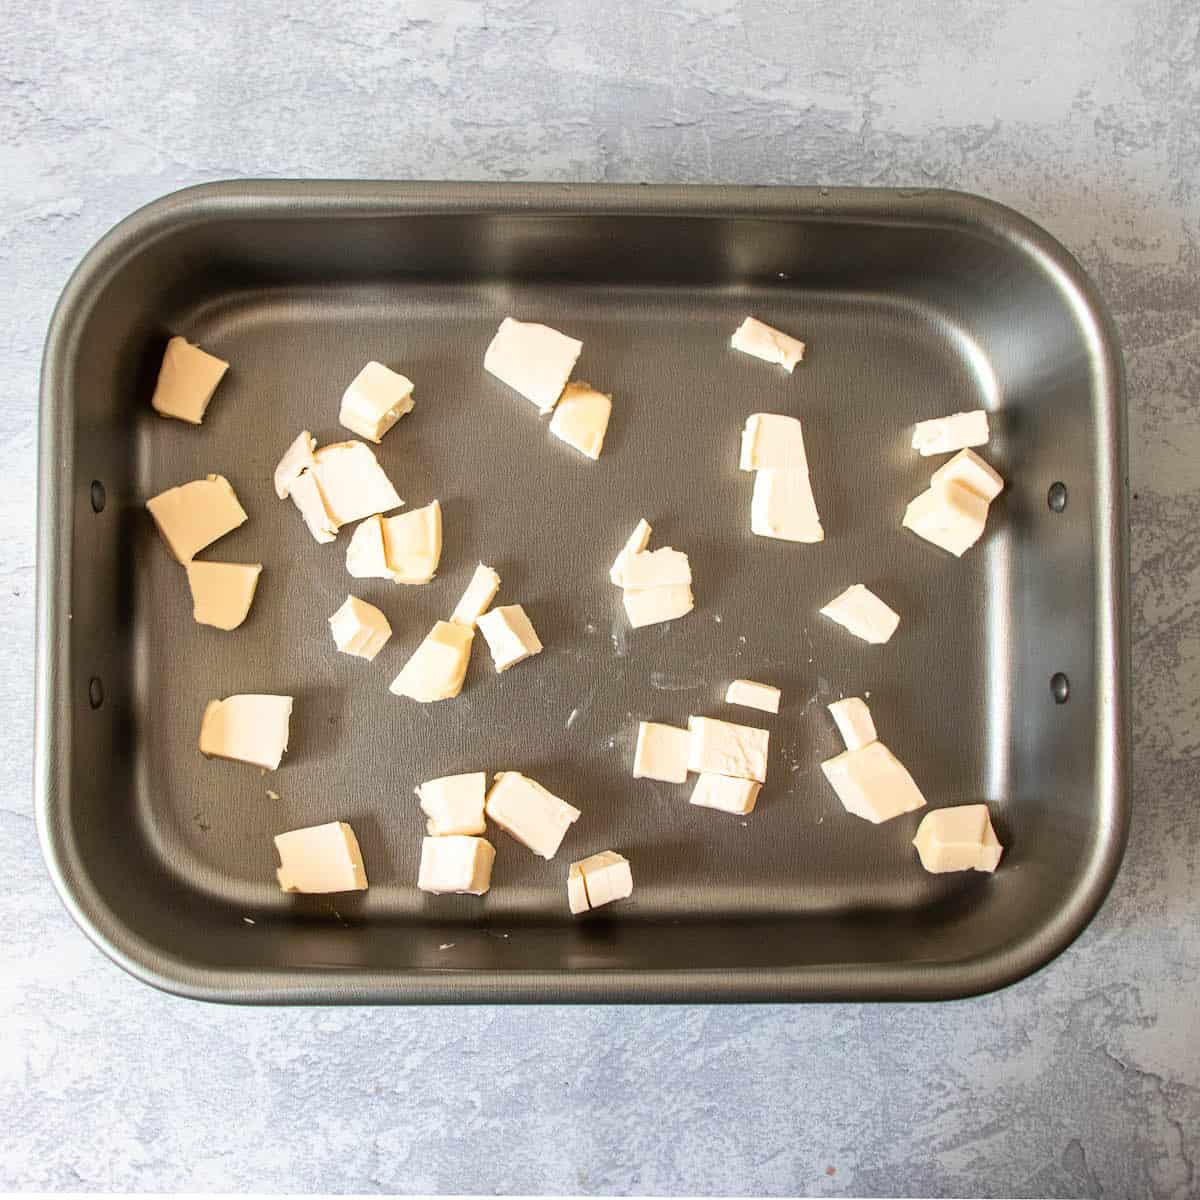 cubed butter in baking pan